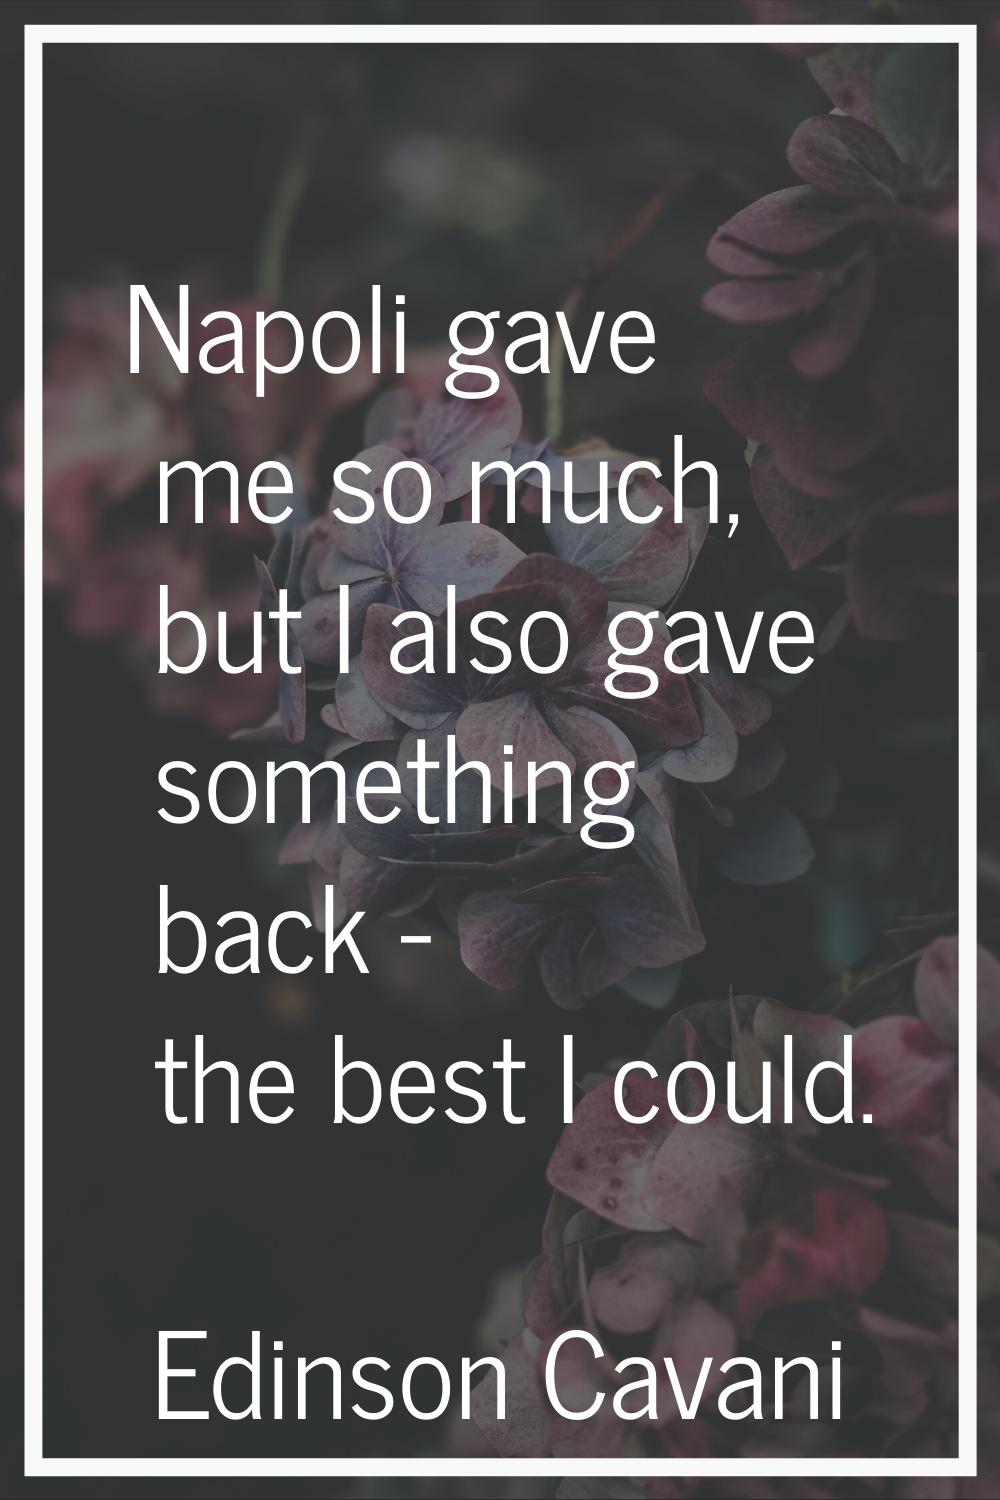 Napoli gave me so much, but I also gave something back - the best I could.